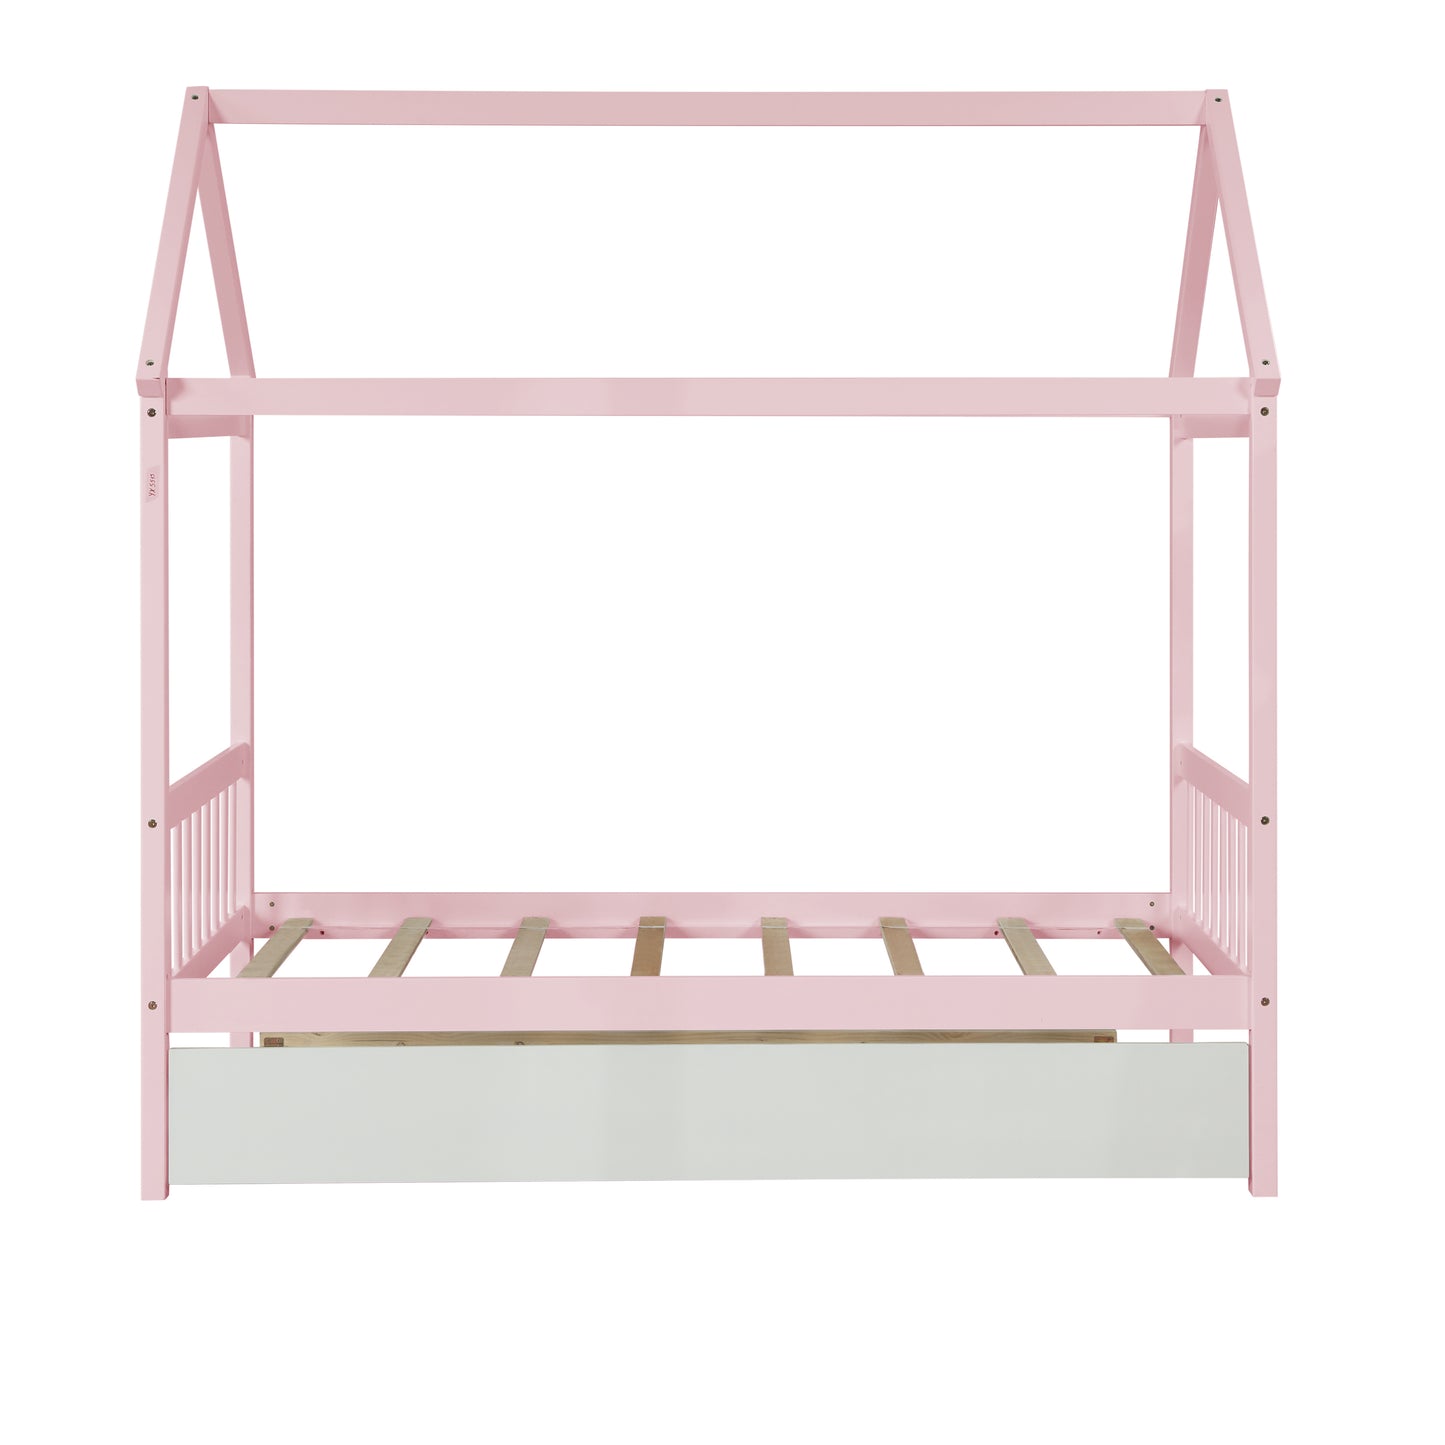 Wood Twin House Platform Bed Frame with Twin Size Trundle - Warm Pink Color, No Box Spring Needed